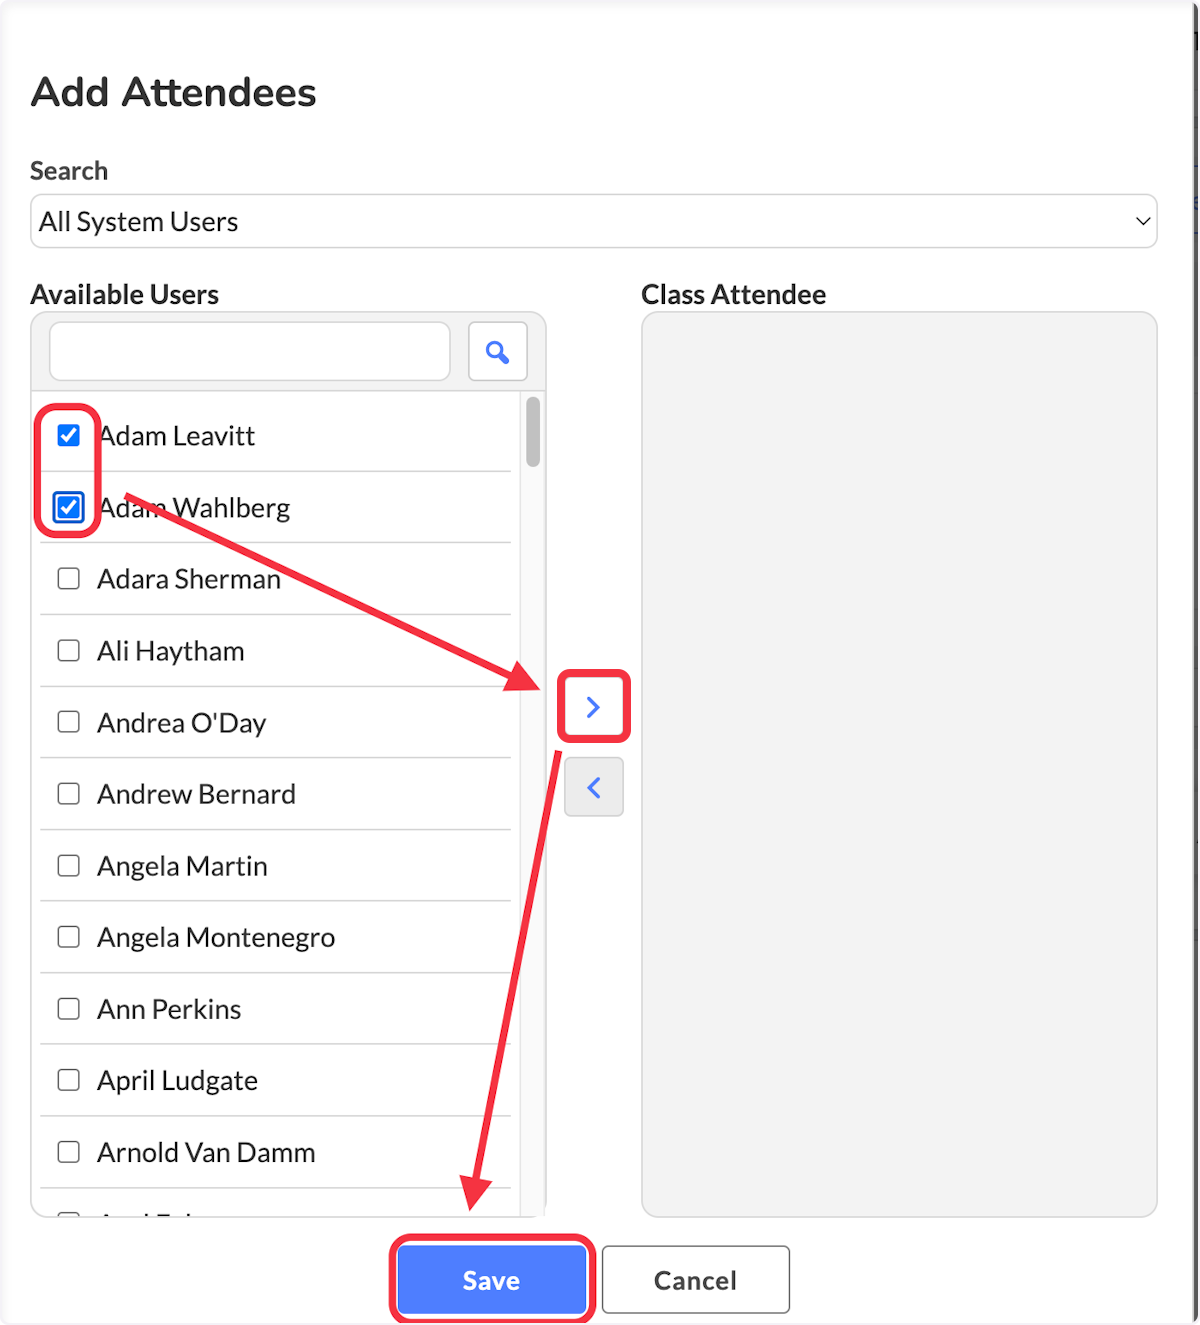 Choose the individuals who you will be adding and select the arrow to add them to the class. When done, click Save. 